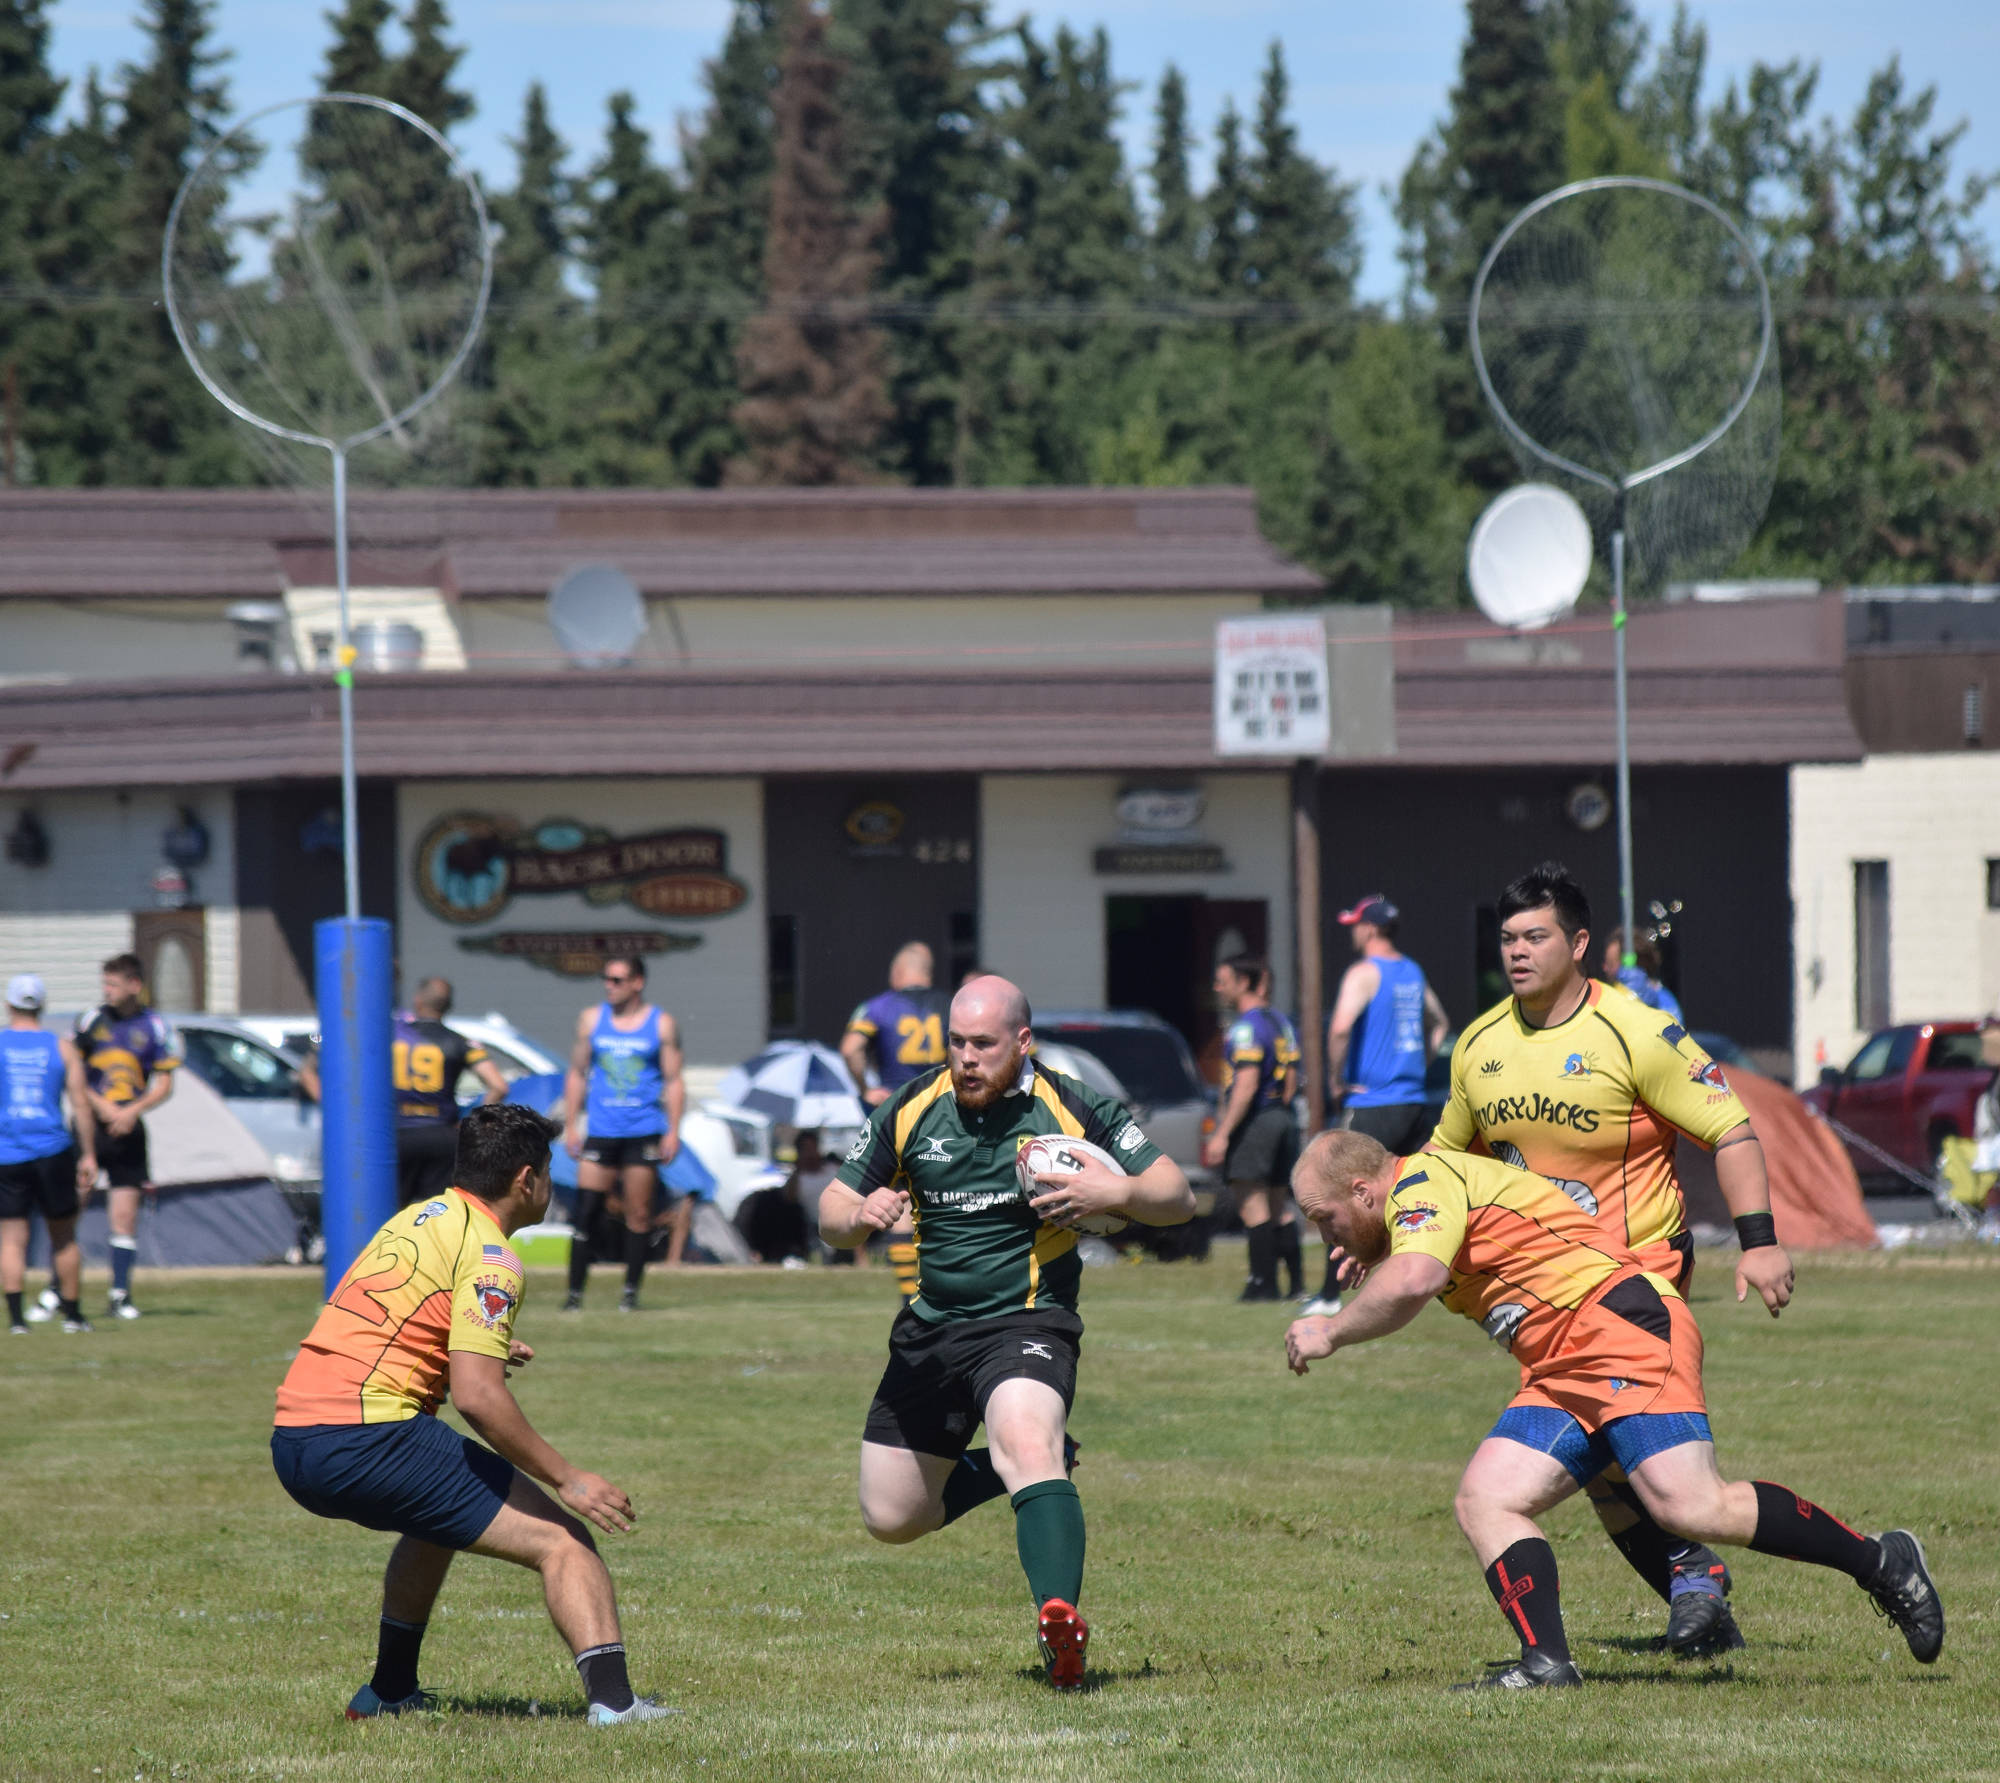 Kenai Wolfpack and Fairbanks SunDawgs players compete in a loser-out semifinal Saturday at the Between the Tides Dipfest Rugby 10’s tournament at Spur View field in Kenai. (Photo by Joey Klecka/Peninsula Clarion)